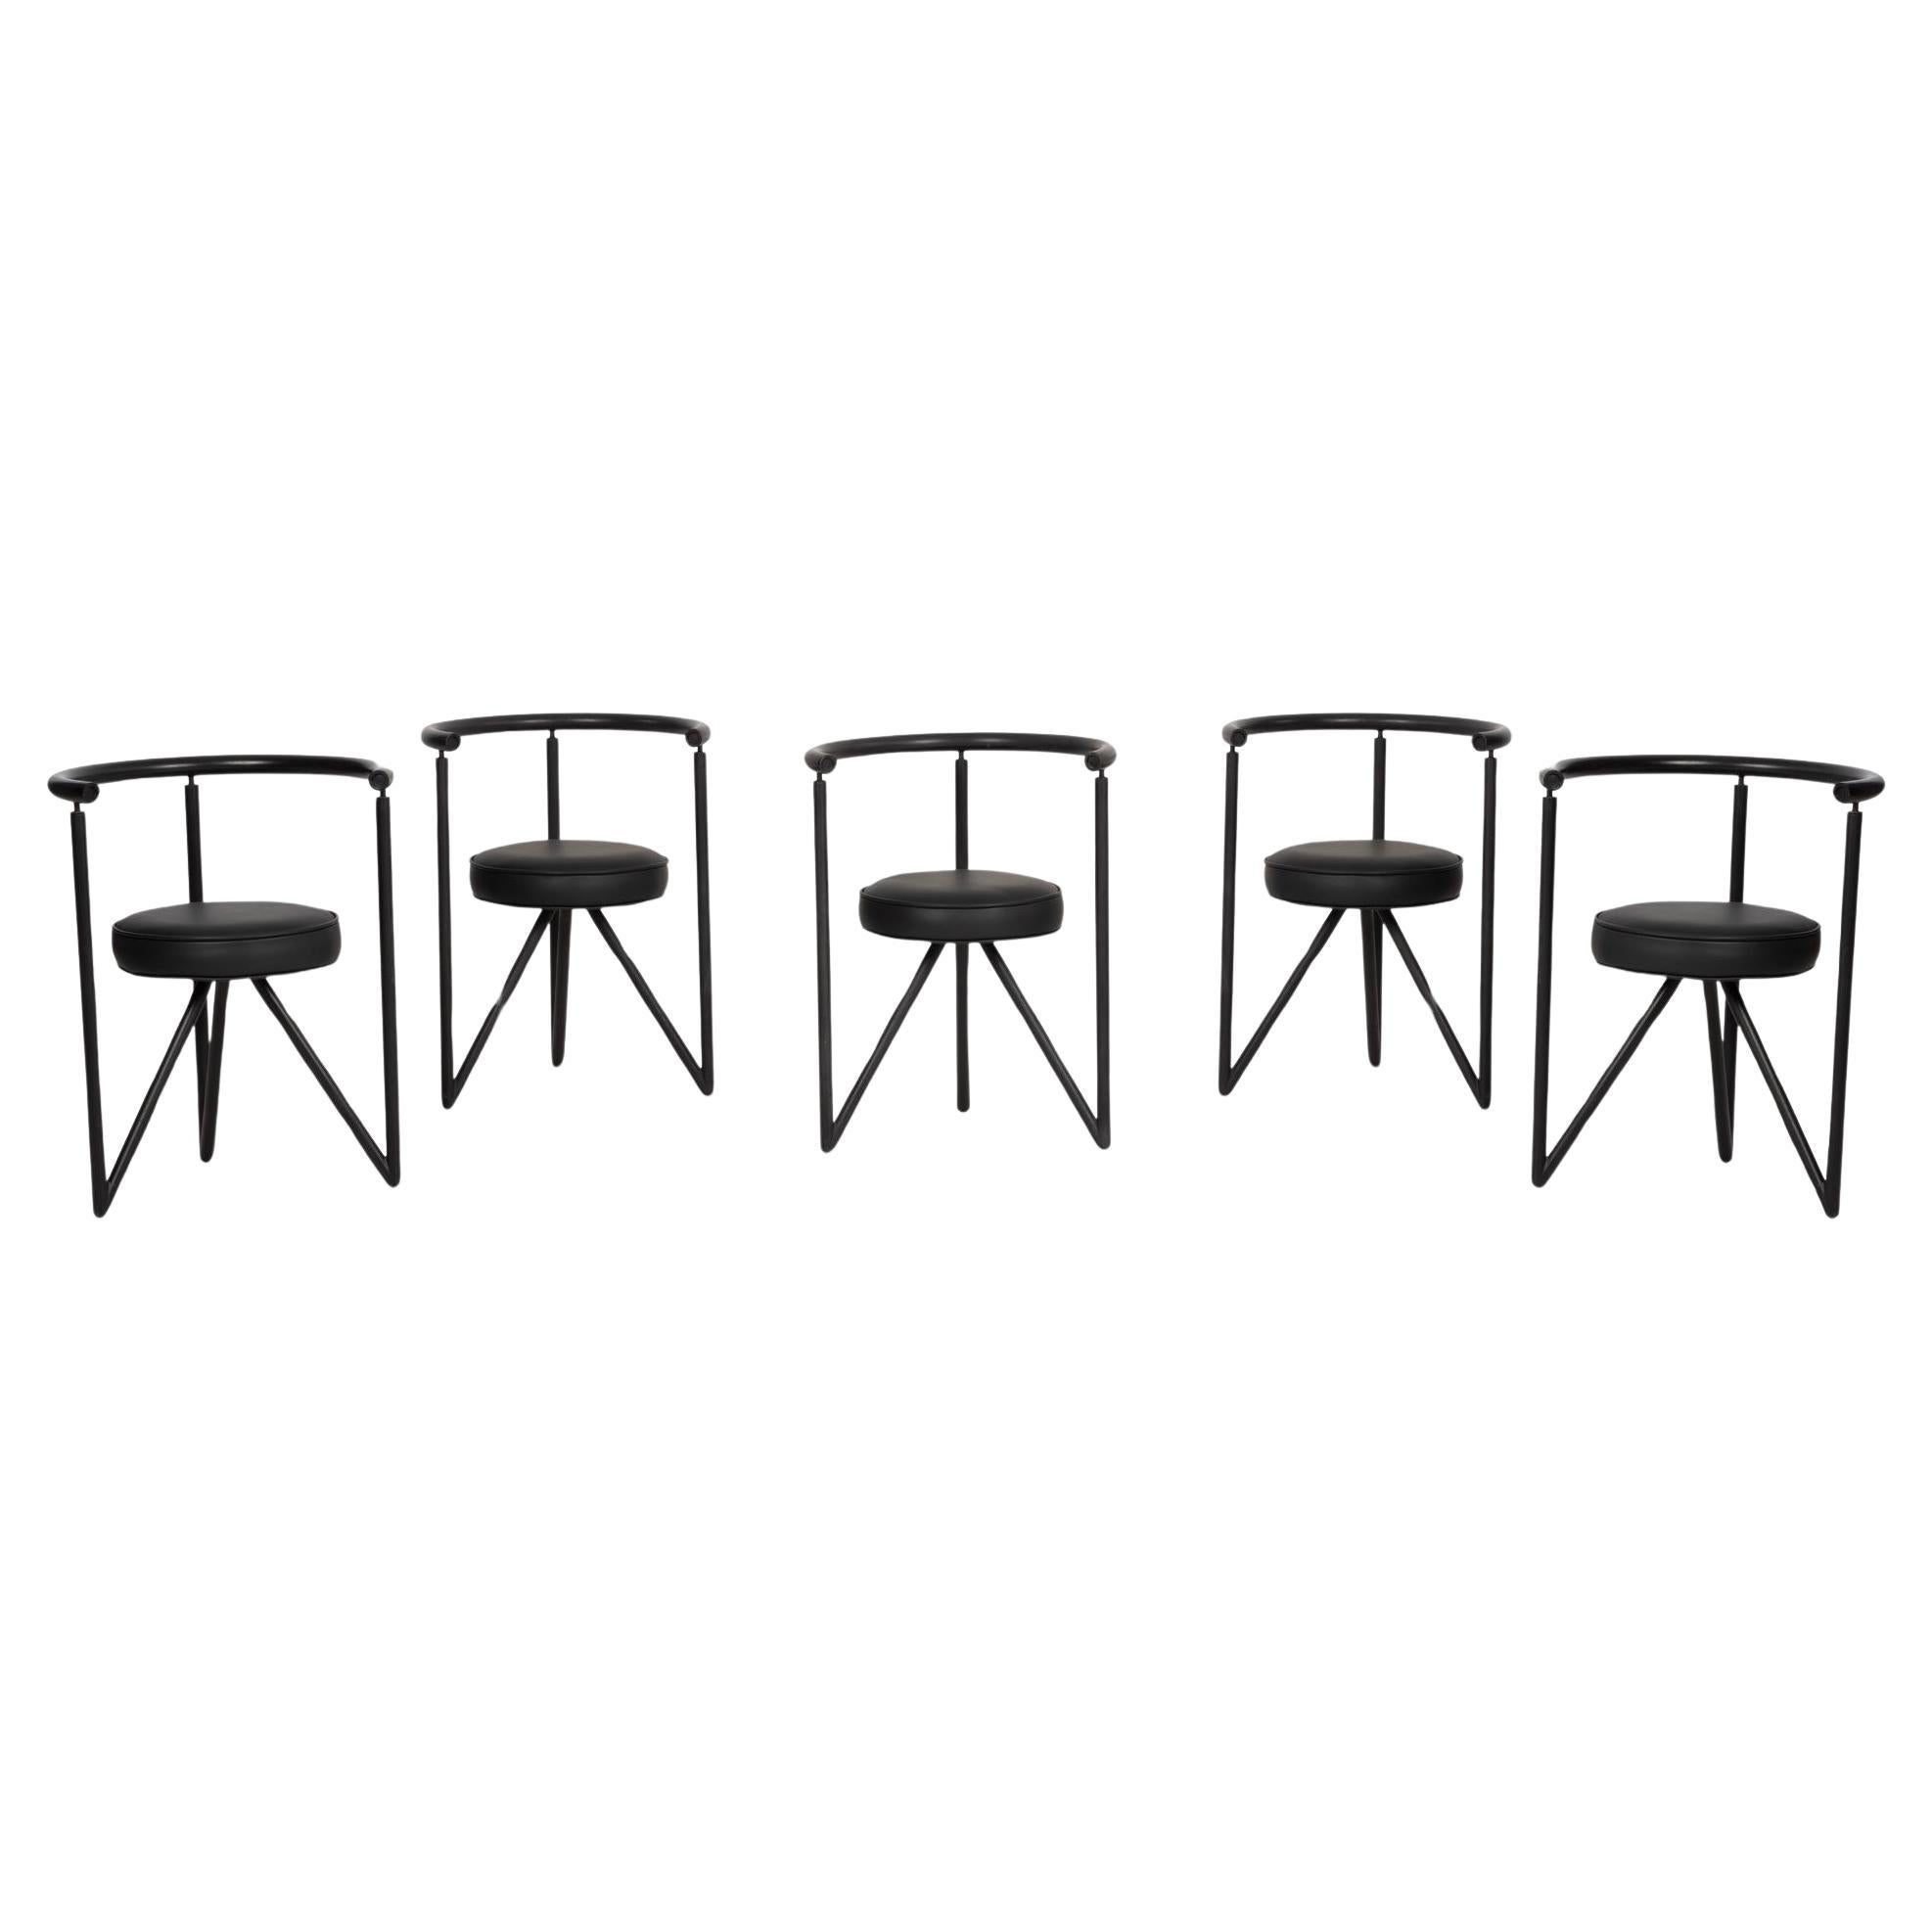 Philippe Starck Miss Dorn Chairs, set of Five by Disform, Spain 1982